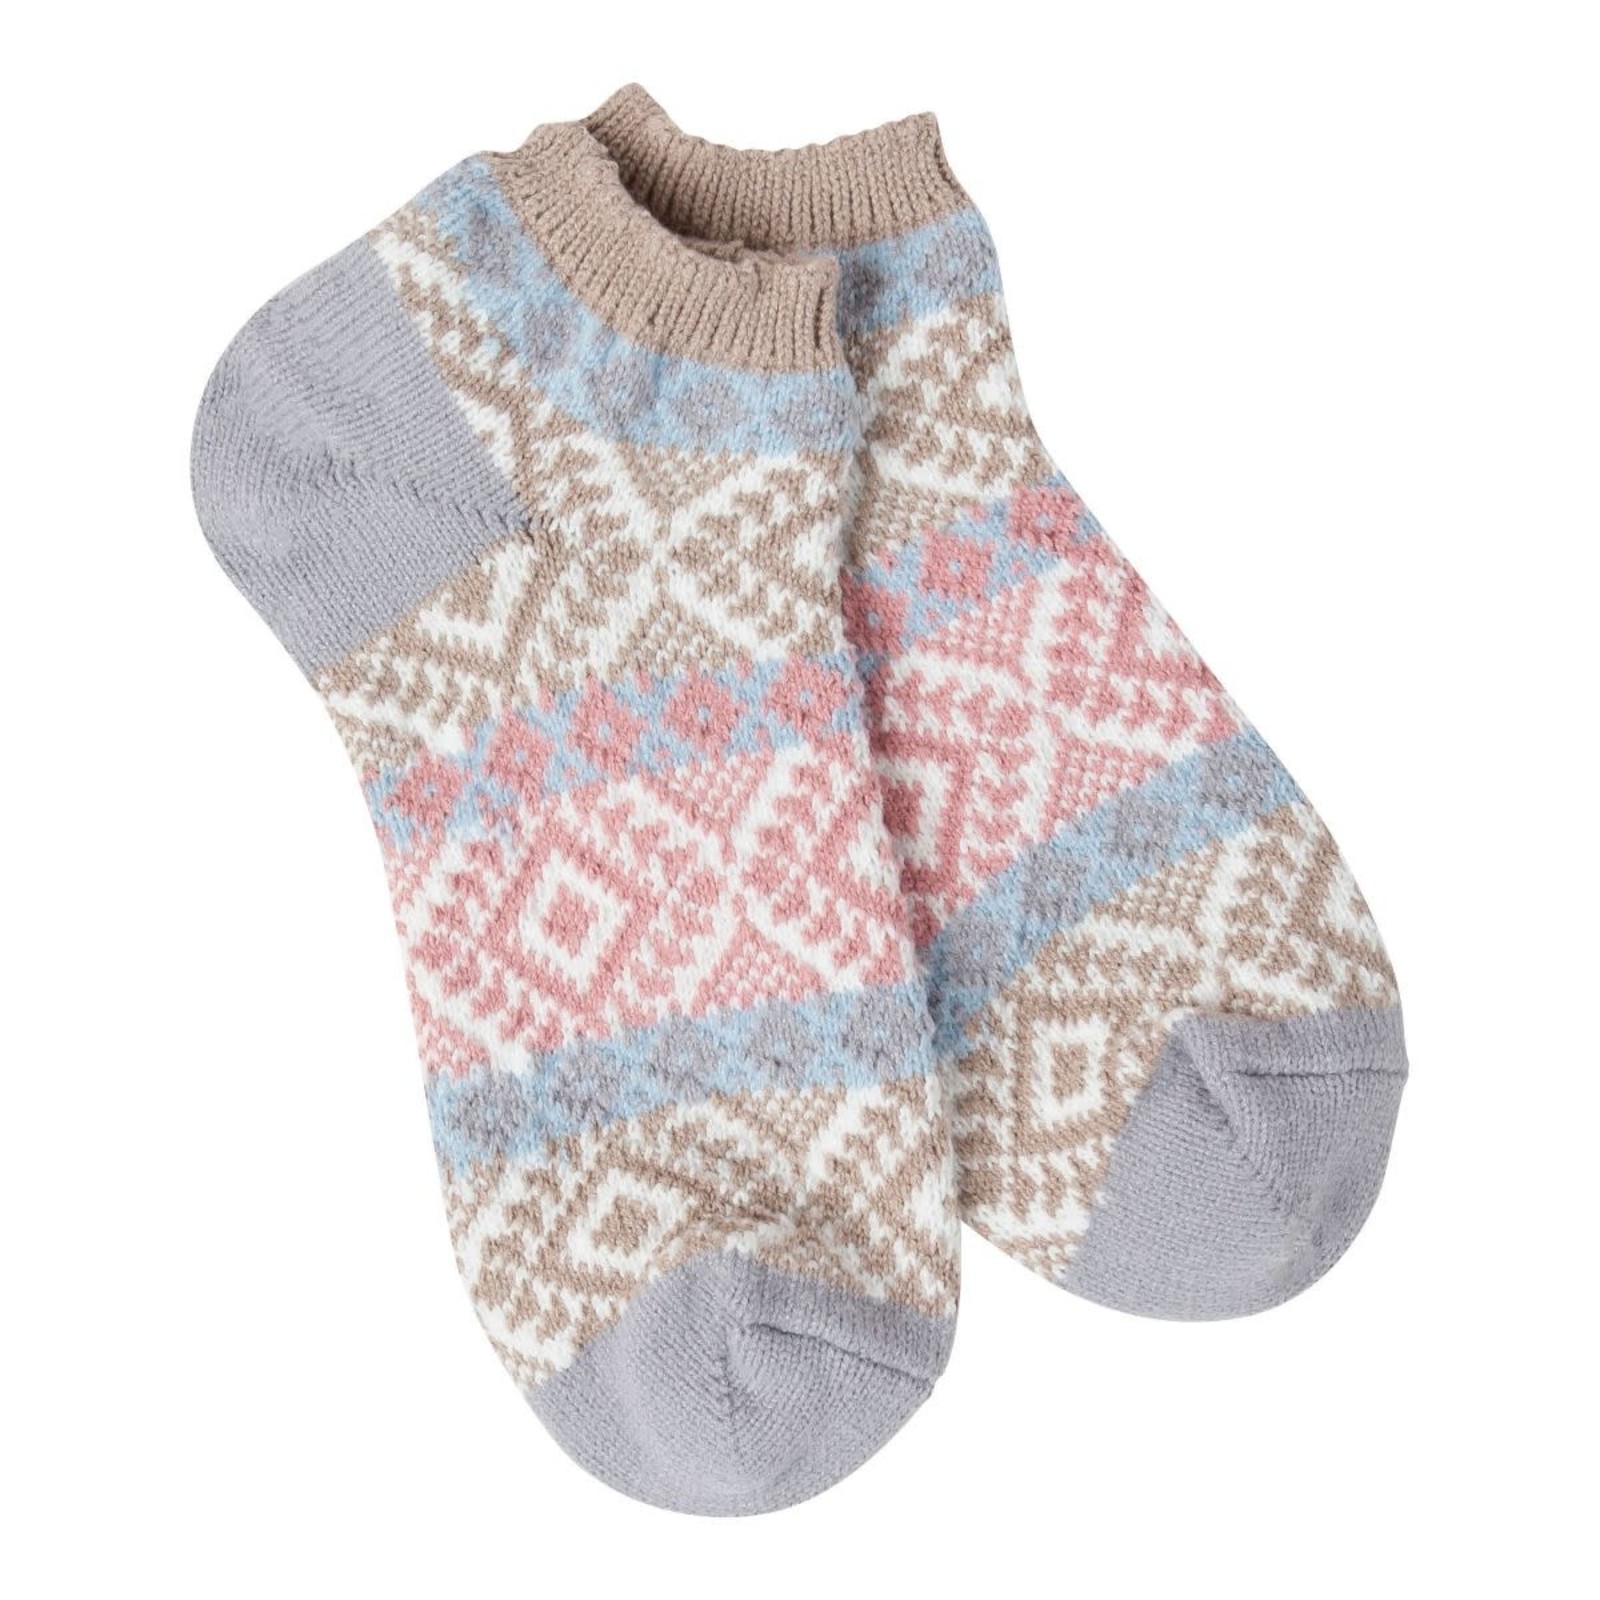 World's Softest GALLERY TEXTURED LOW Sock WSGALLO loading=